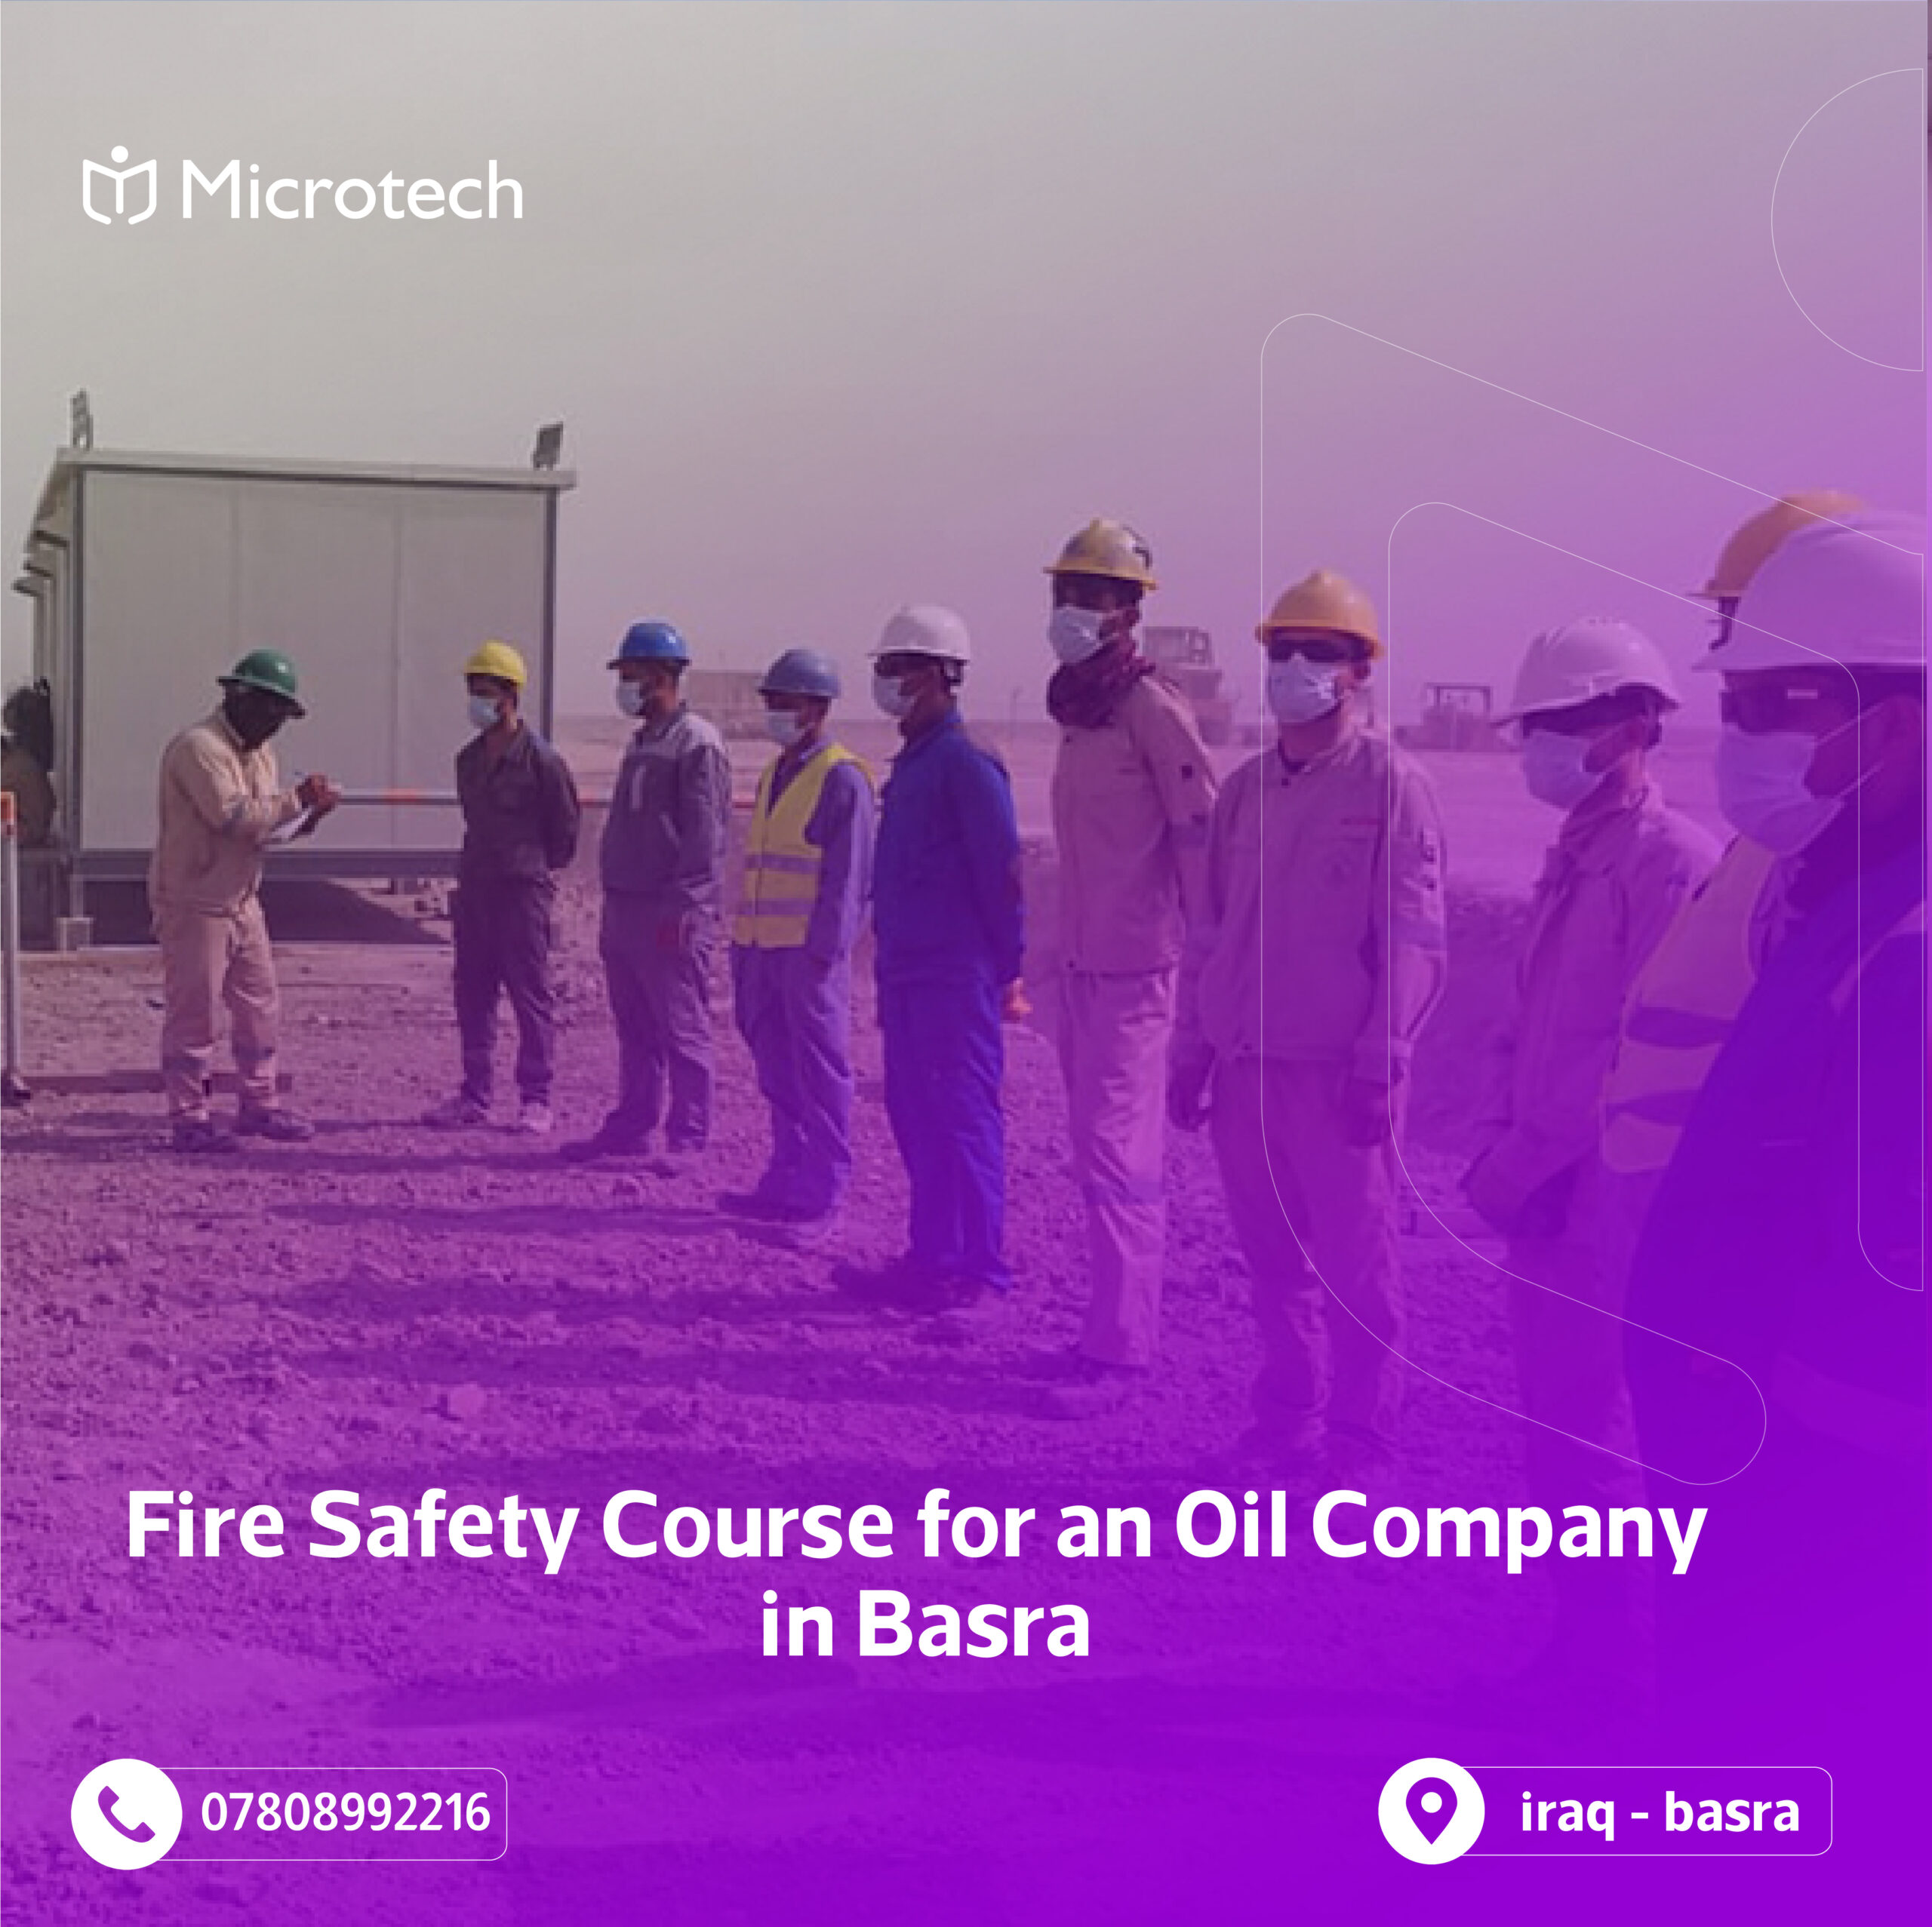 Fire Safety course for a company operating in oil sector